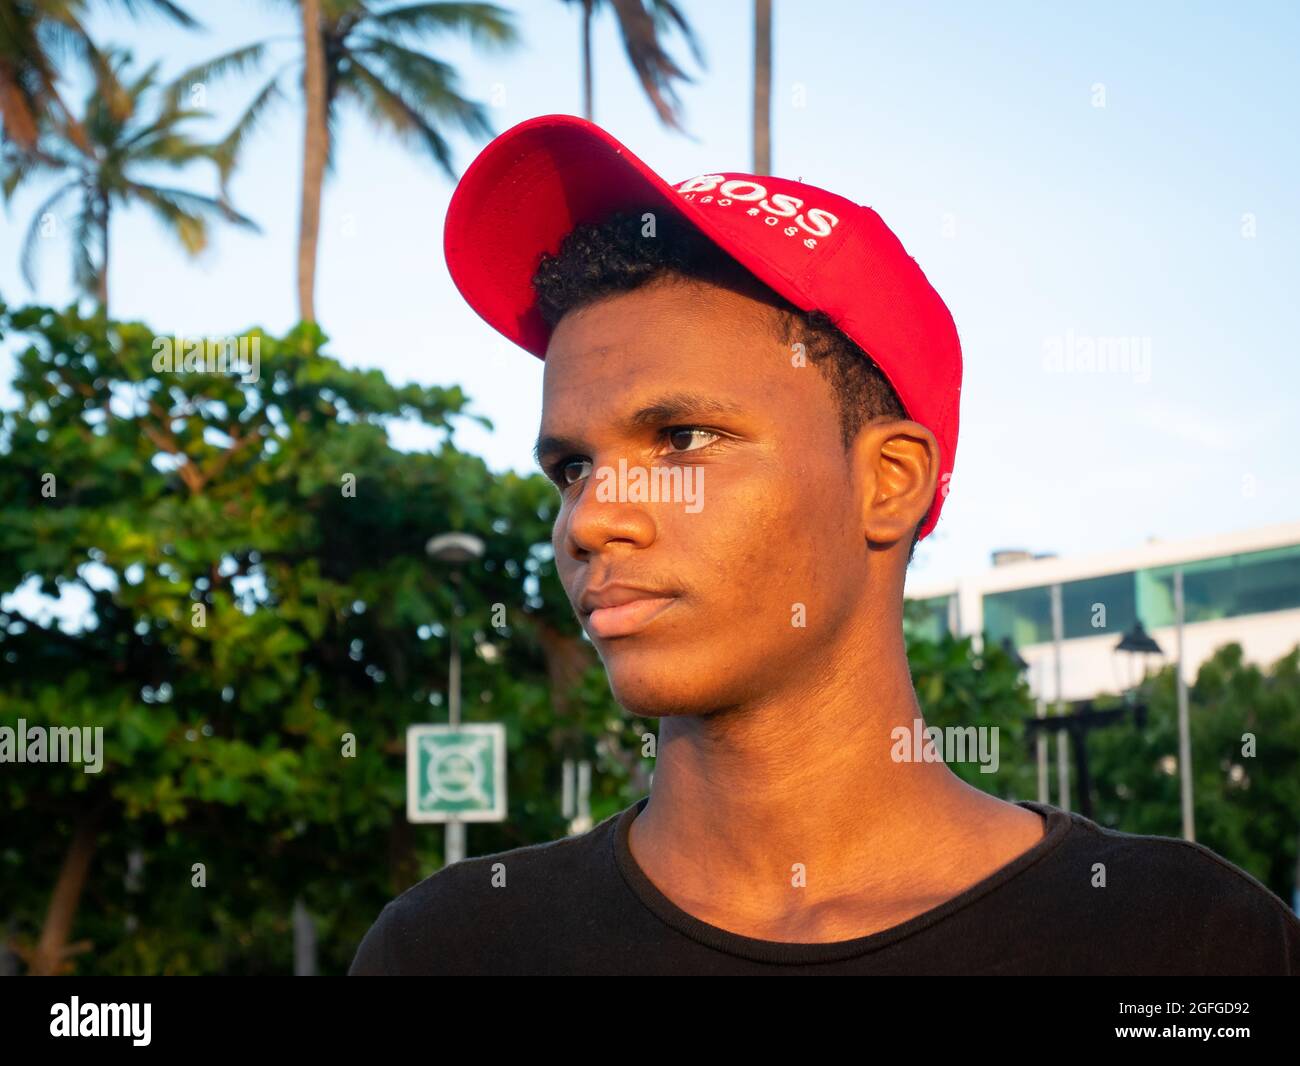 Riohacha, La Guajira, Colombia - May 26 2021: Portrait of a Young Latin Man with a Red Cap Looking at the Sunset with Palm Trees and Blue Sky in the B Stock Photo